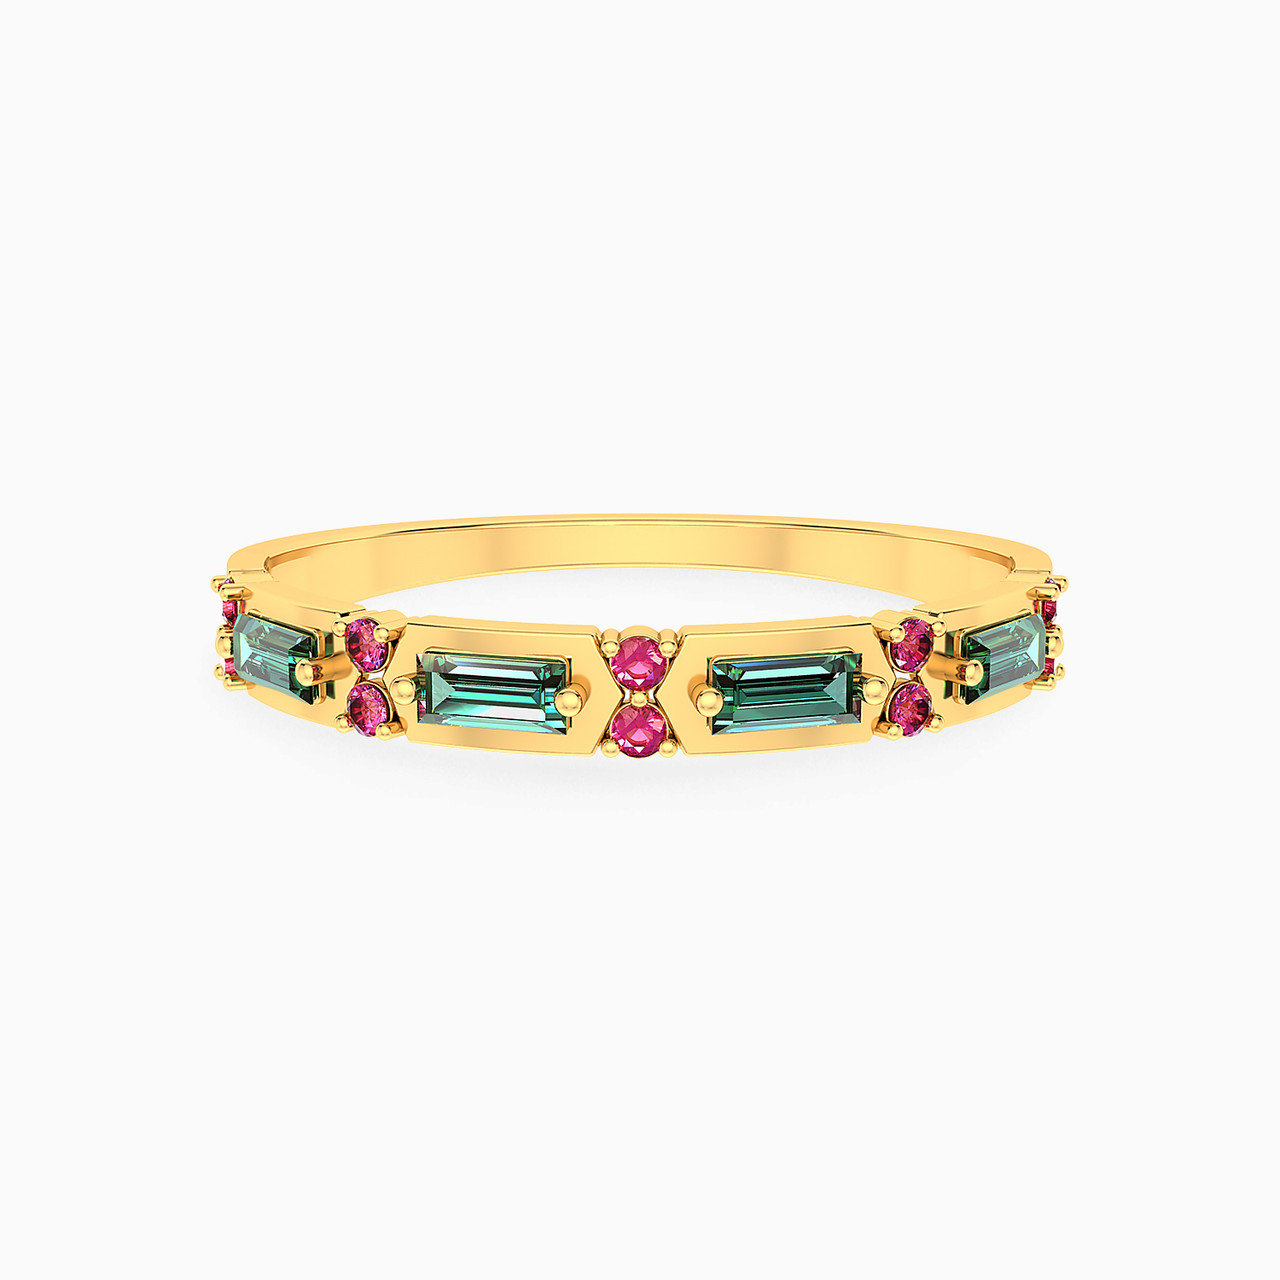 Multi-shaped Colored Stones Statement Ring in 14K Gold 